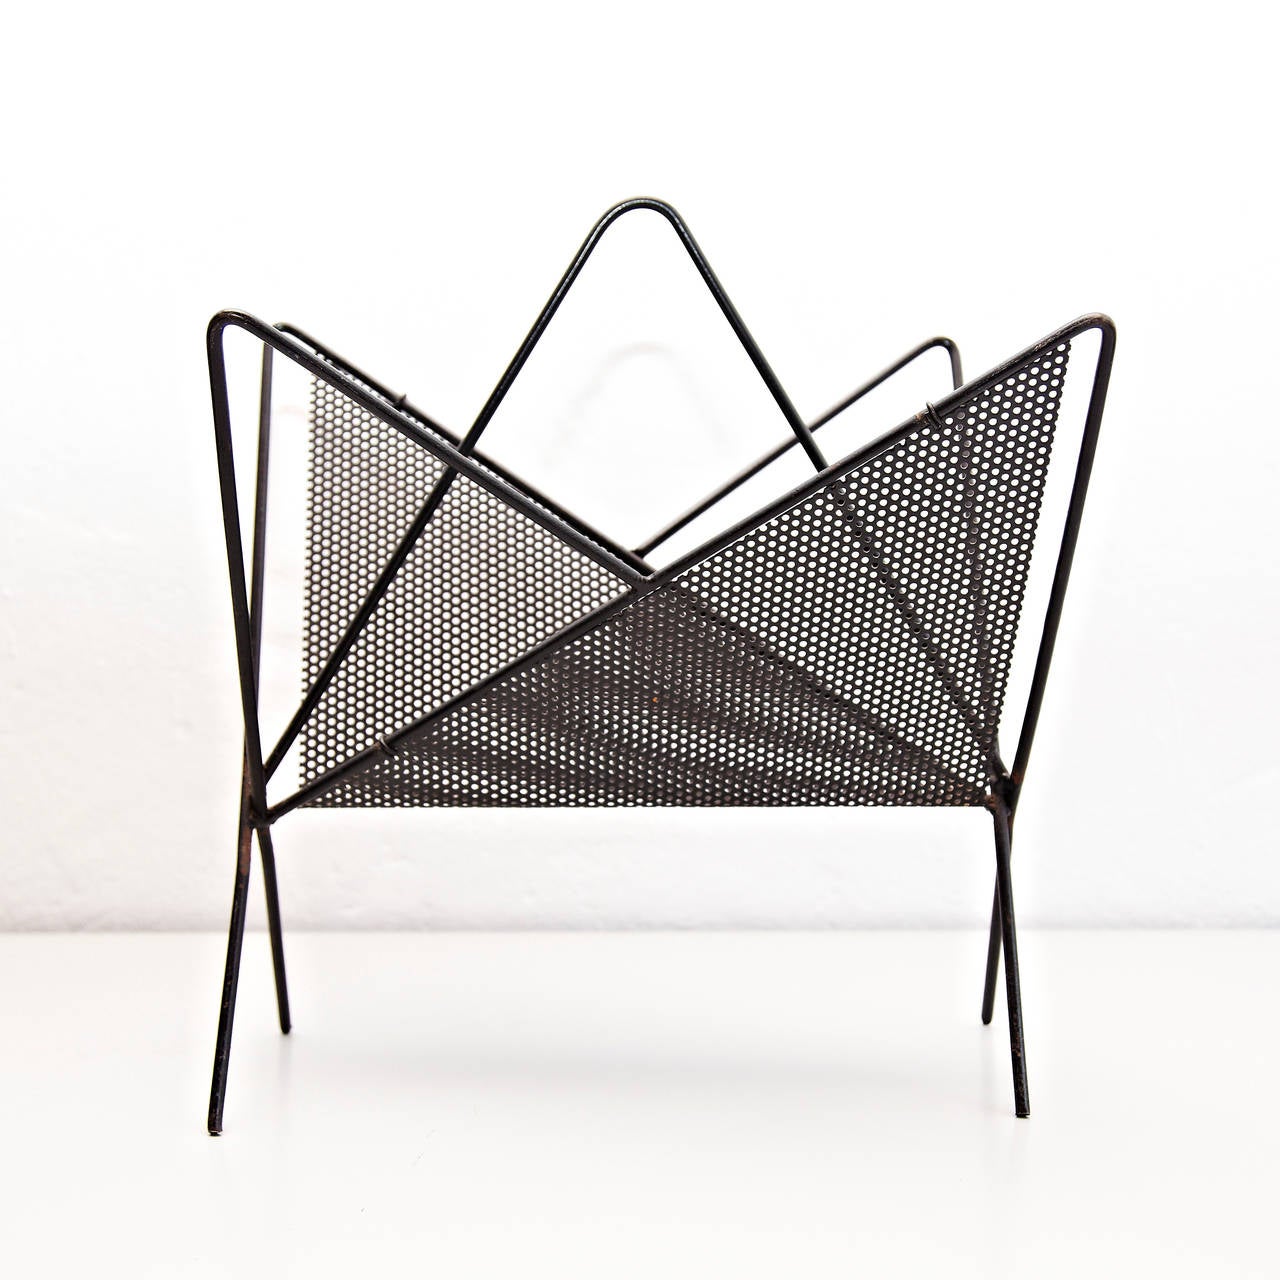 Magazine holder designed by Mathieu Matégot.
Manufactured by Ateliers Matégot (France), circa 1950.
Folded, perforated metal.

In good original condition, with minor wear consistent with age and use, preserving a beautiful patina.

Mathieu